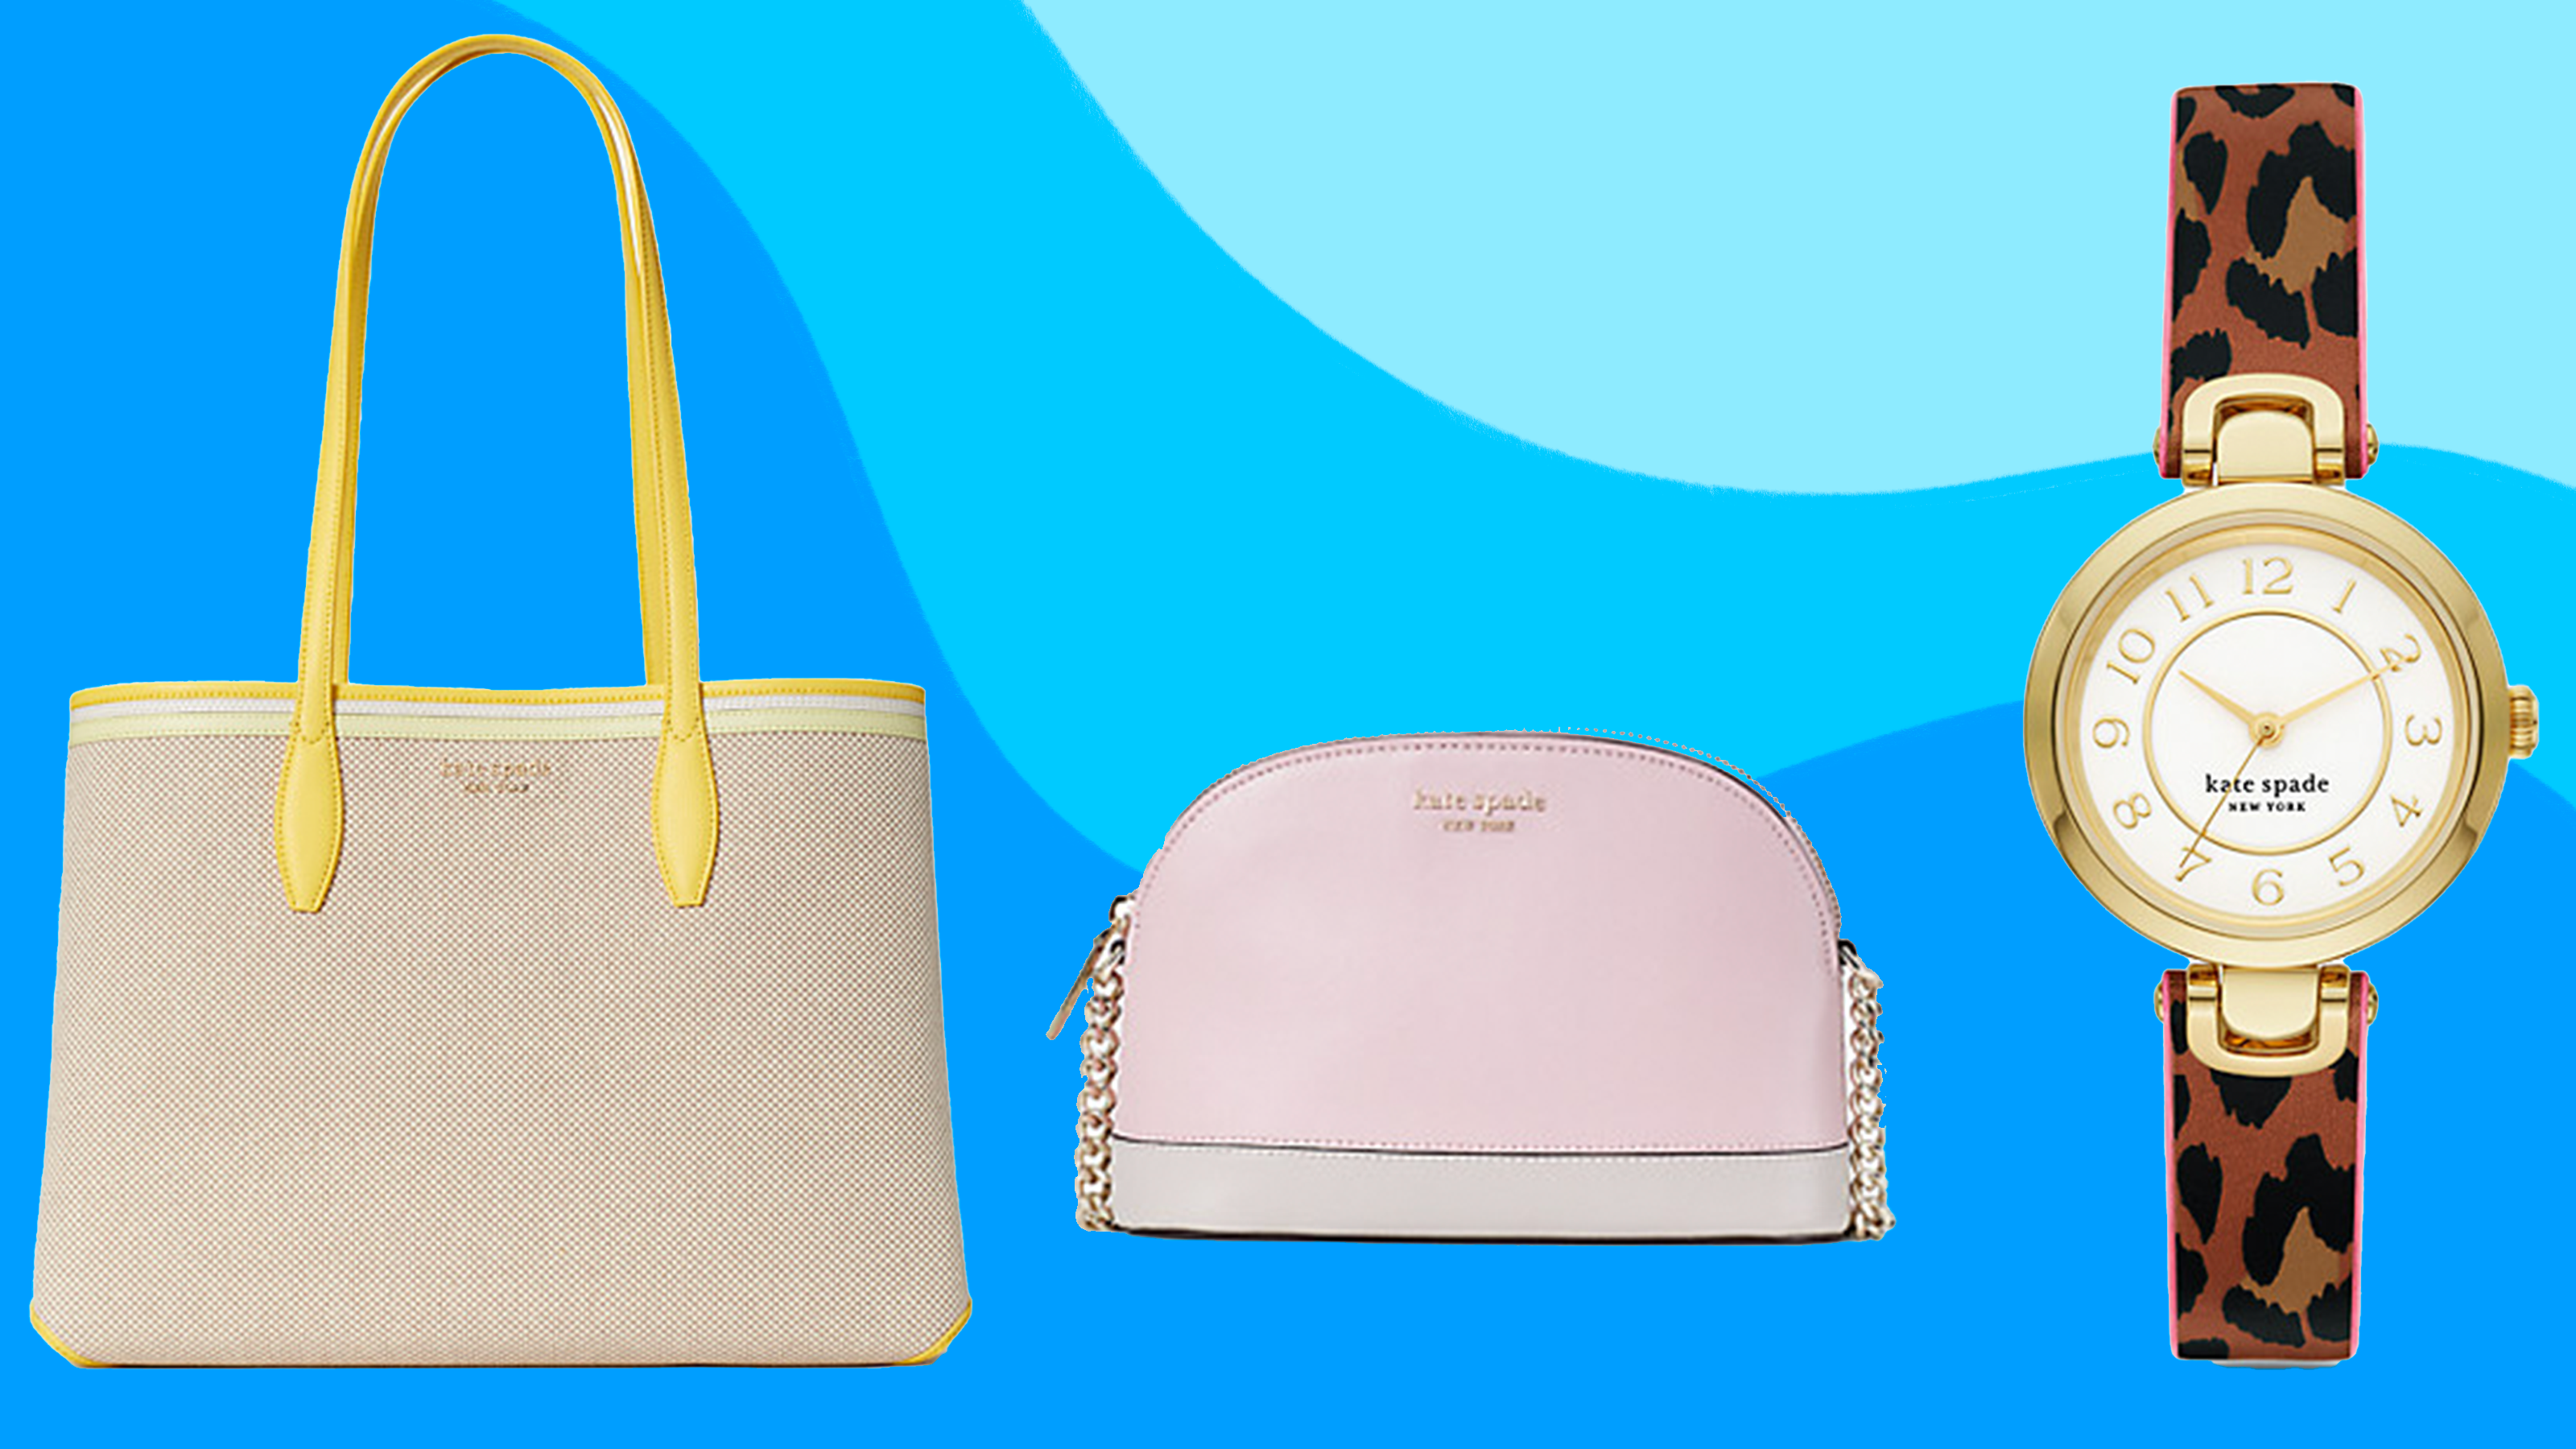 Kate Spade sale: Save an extra 40% on 